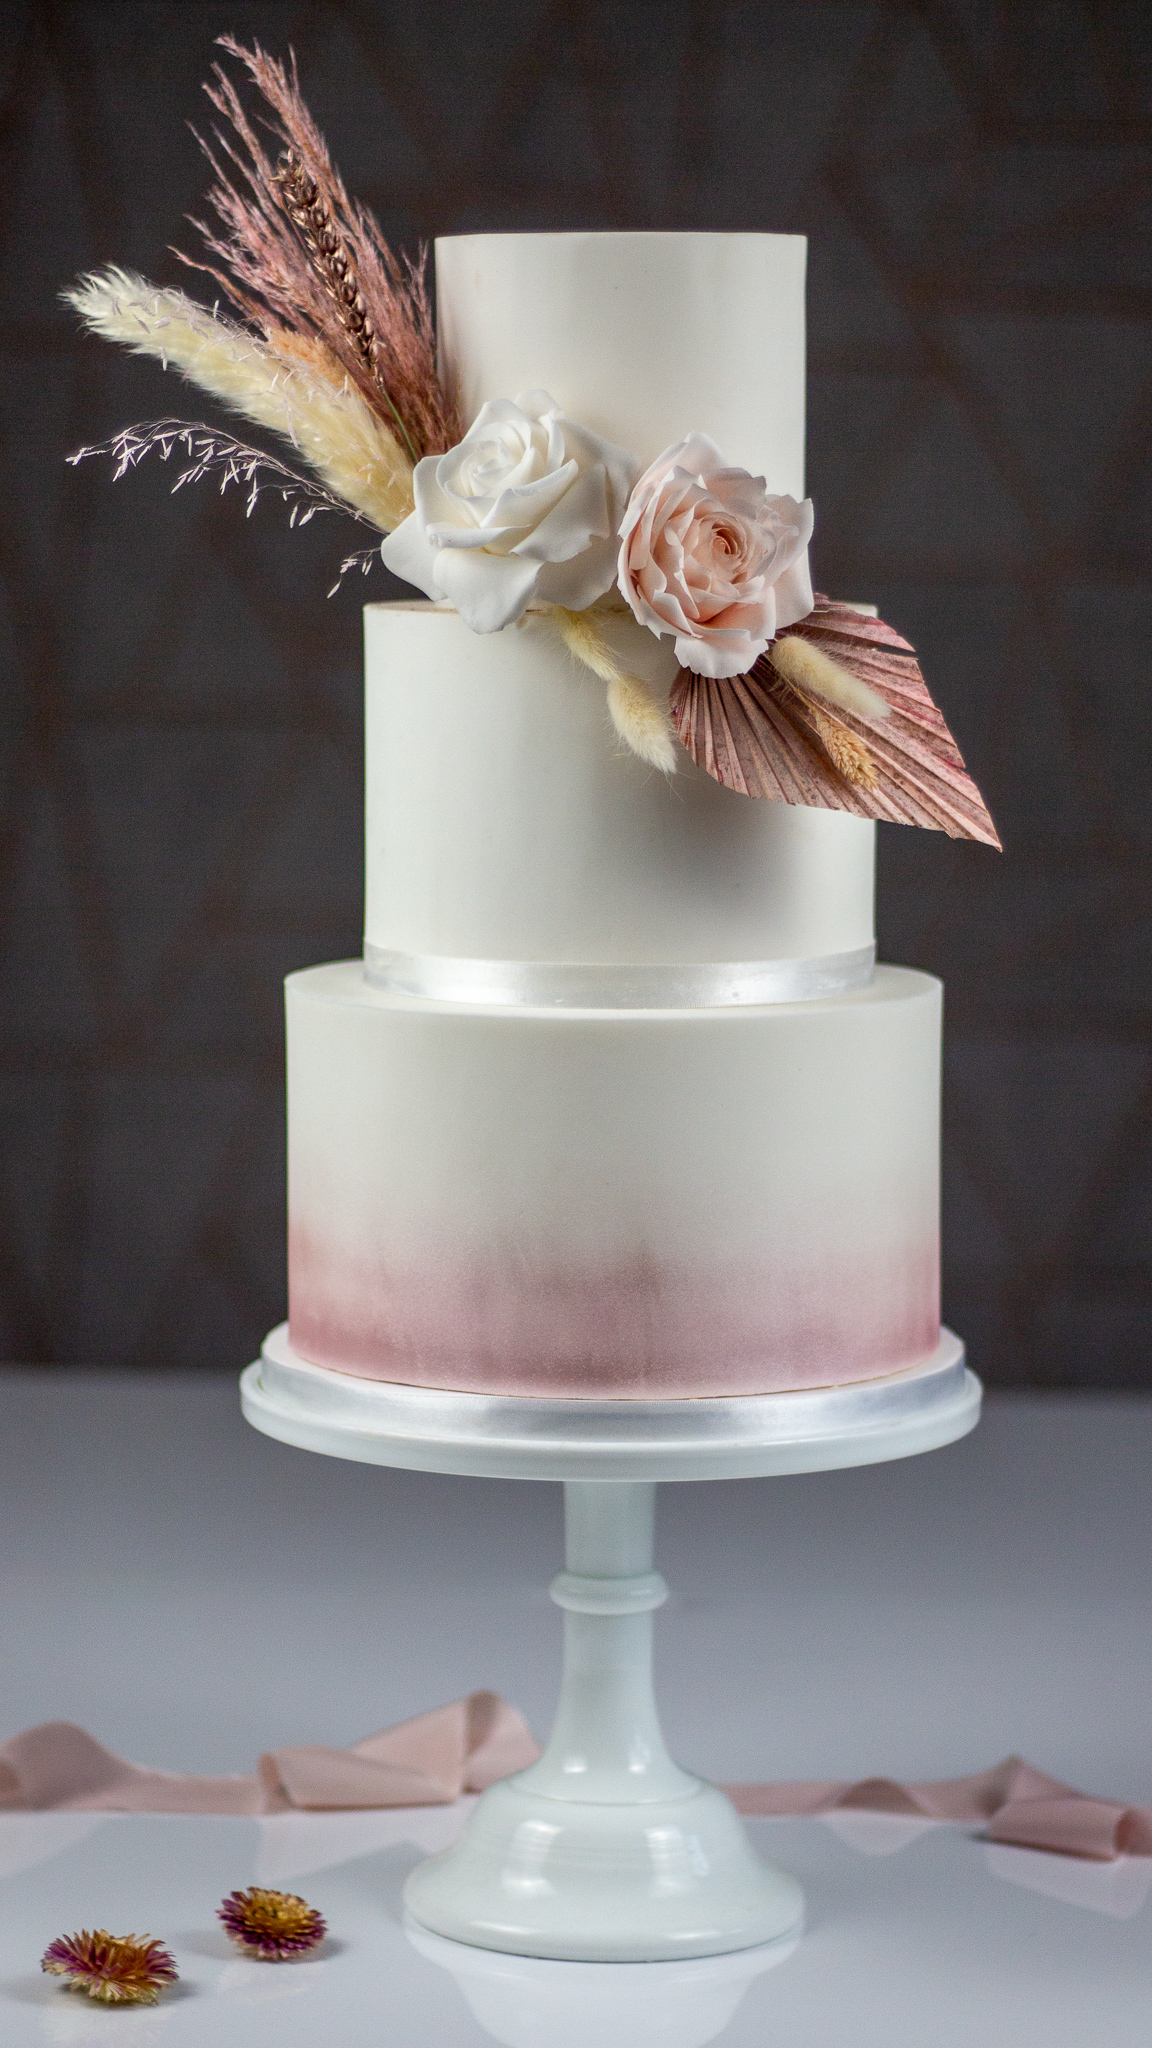 Pink Air Brushed Wedding Cake with Sugar Roses and dried blooms